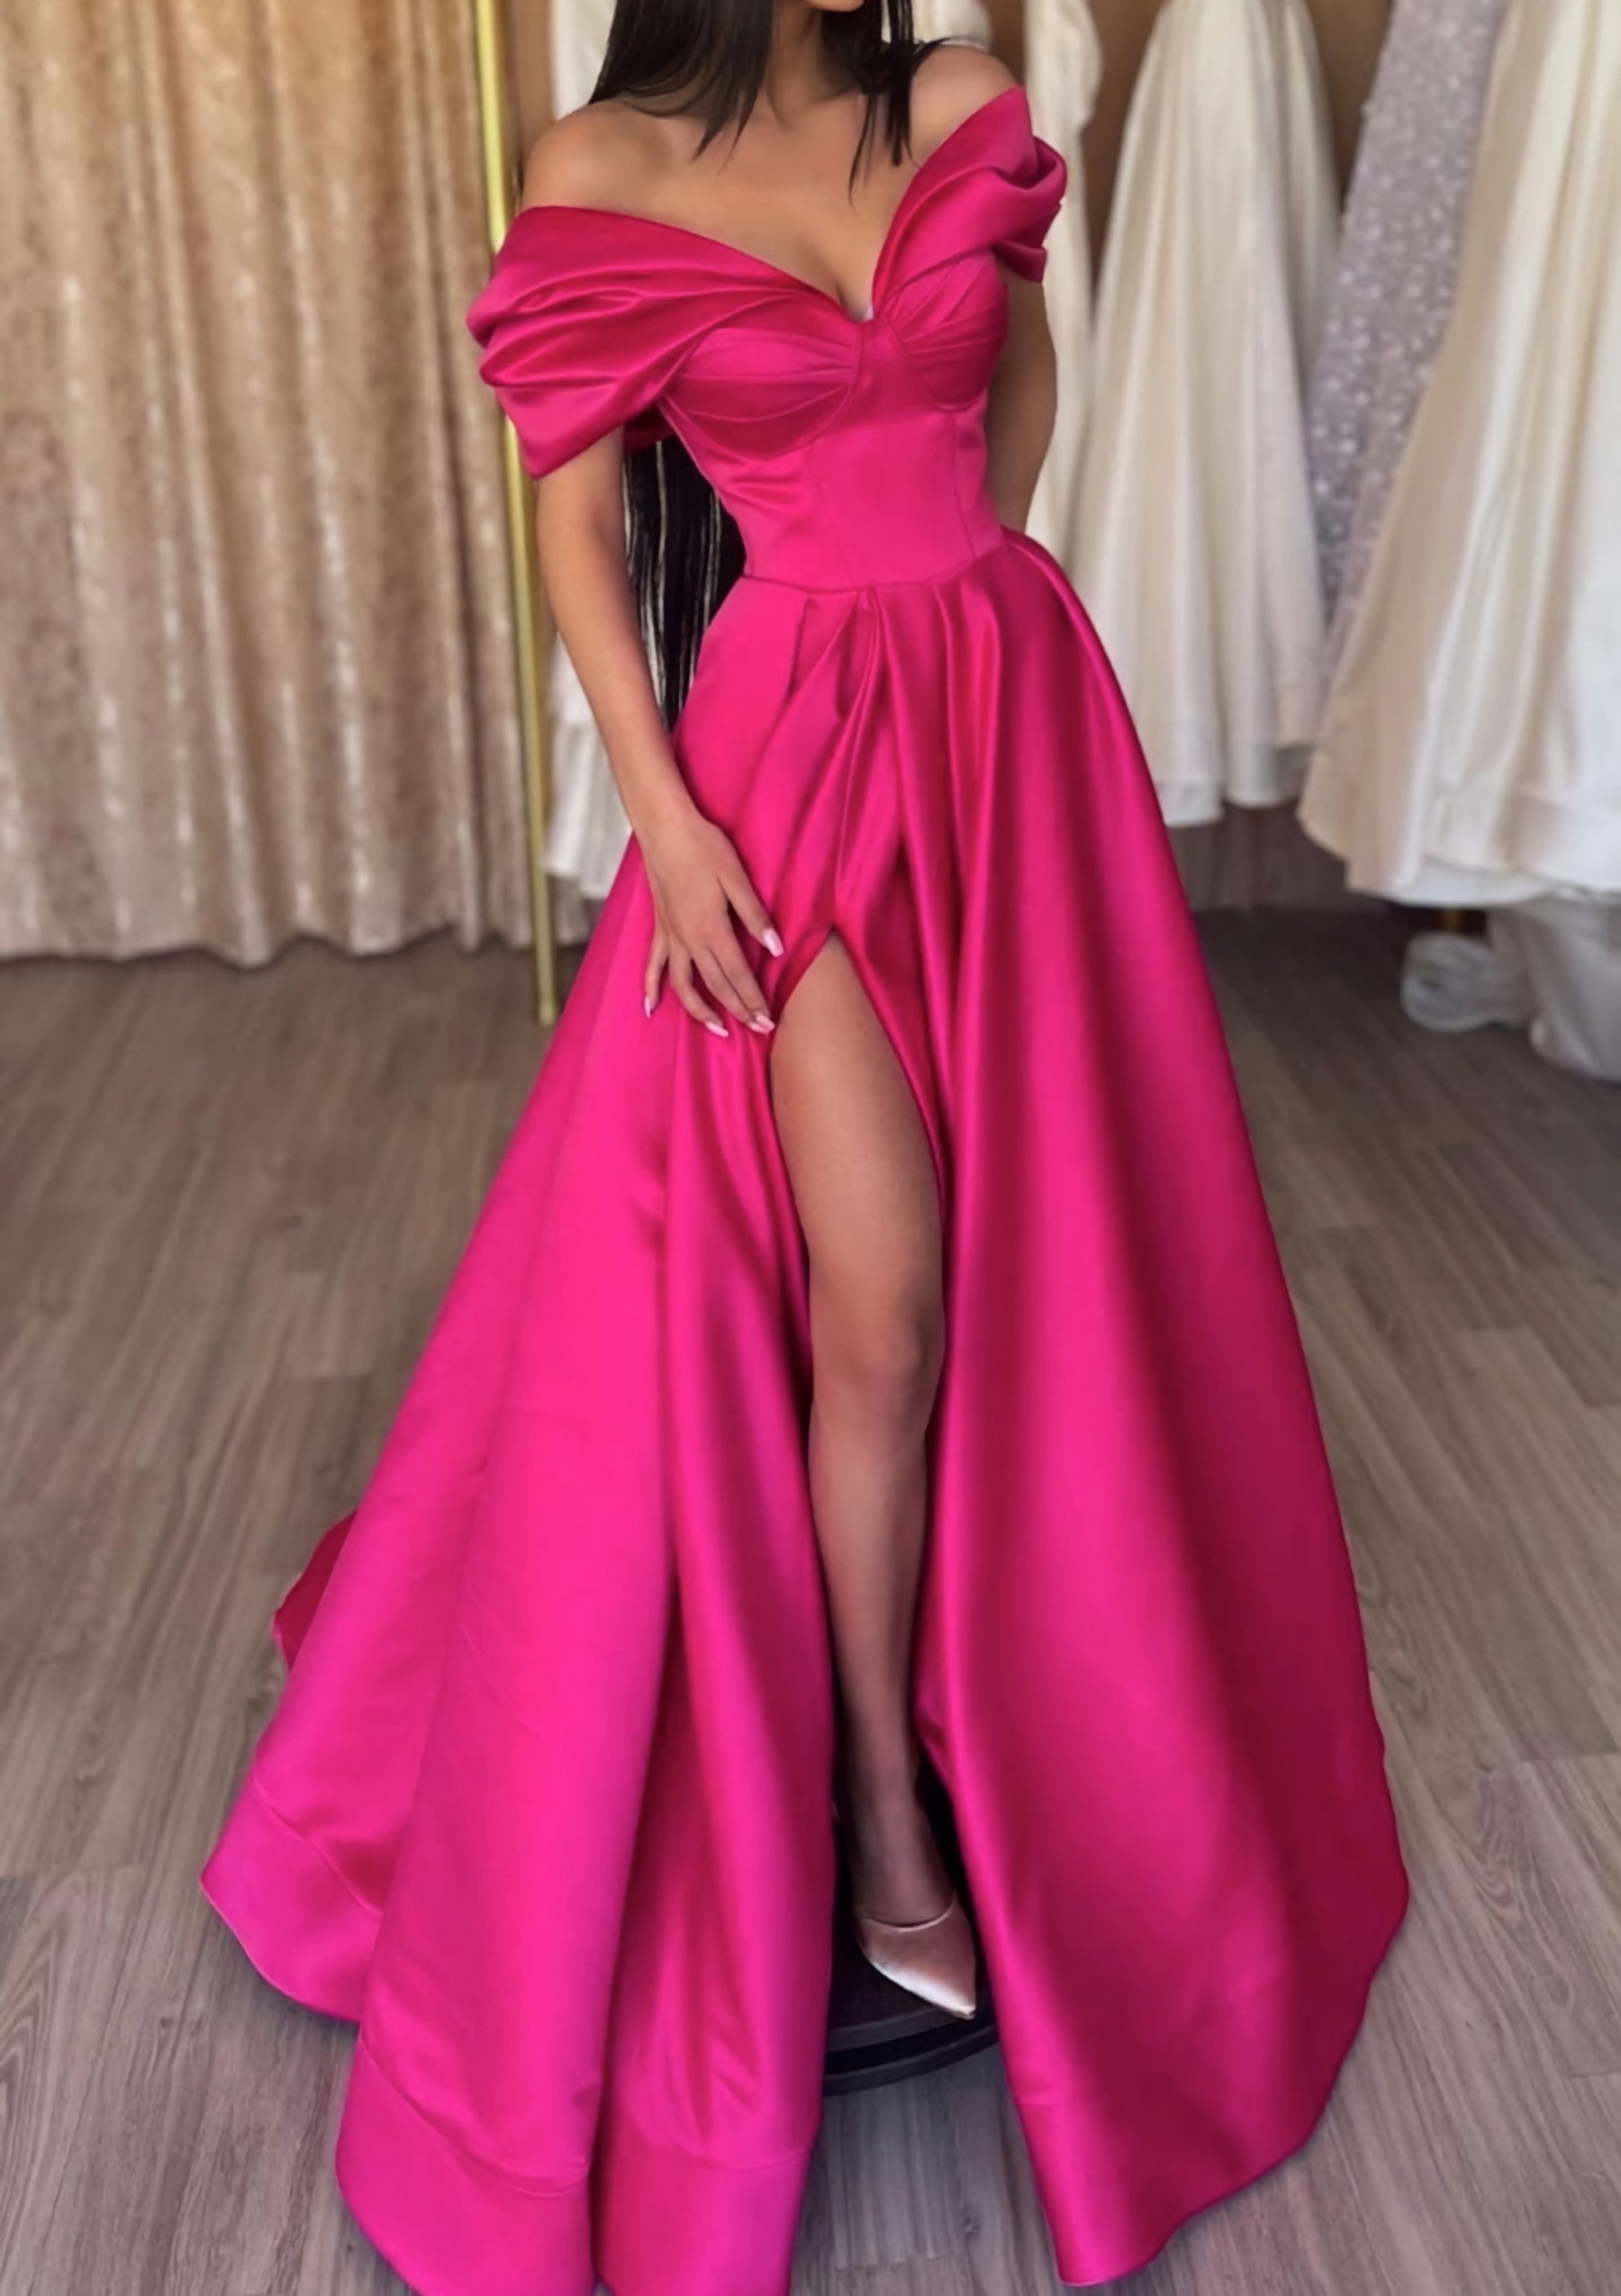 A-line Off-the-Shoulder Short Sleeve Satin Long/Floor-Length Corset Prom Dress With Ruffles Split Gowns, Prom Dress Size 45